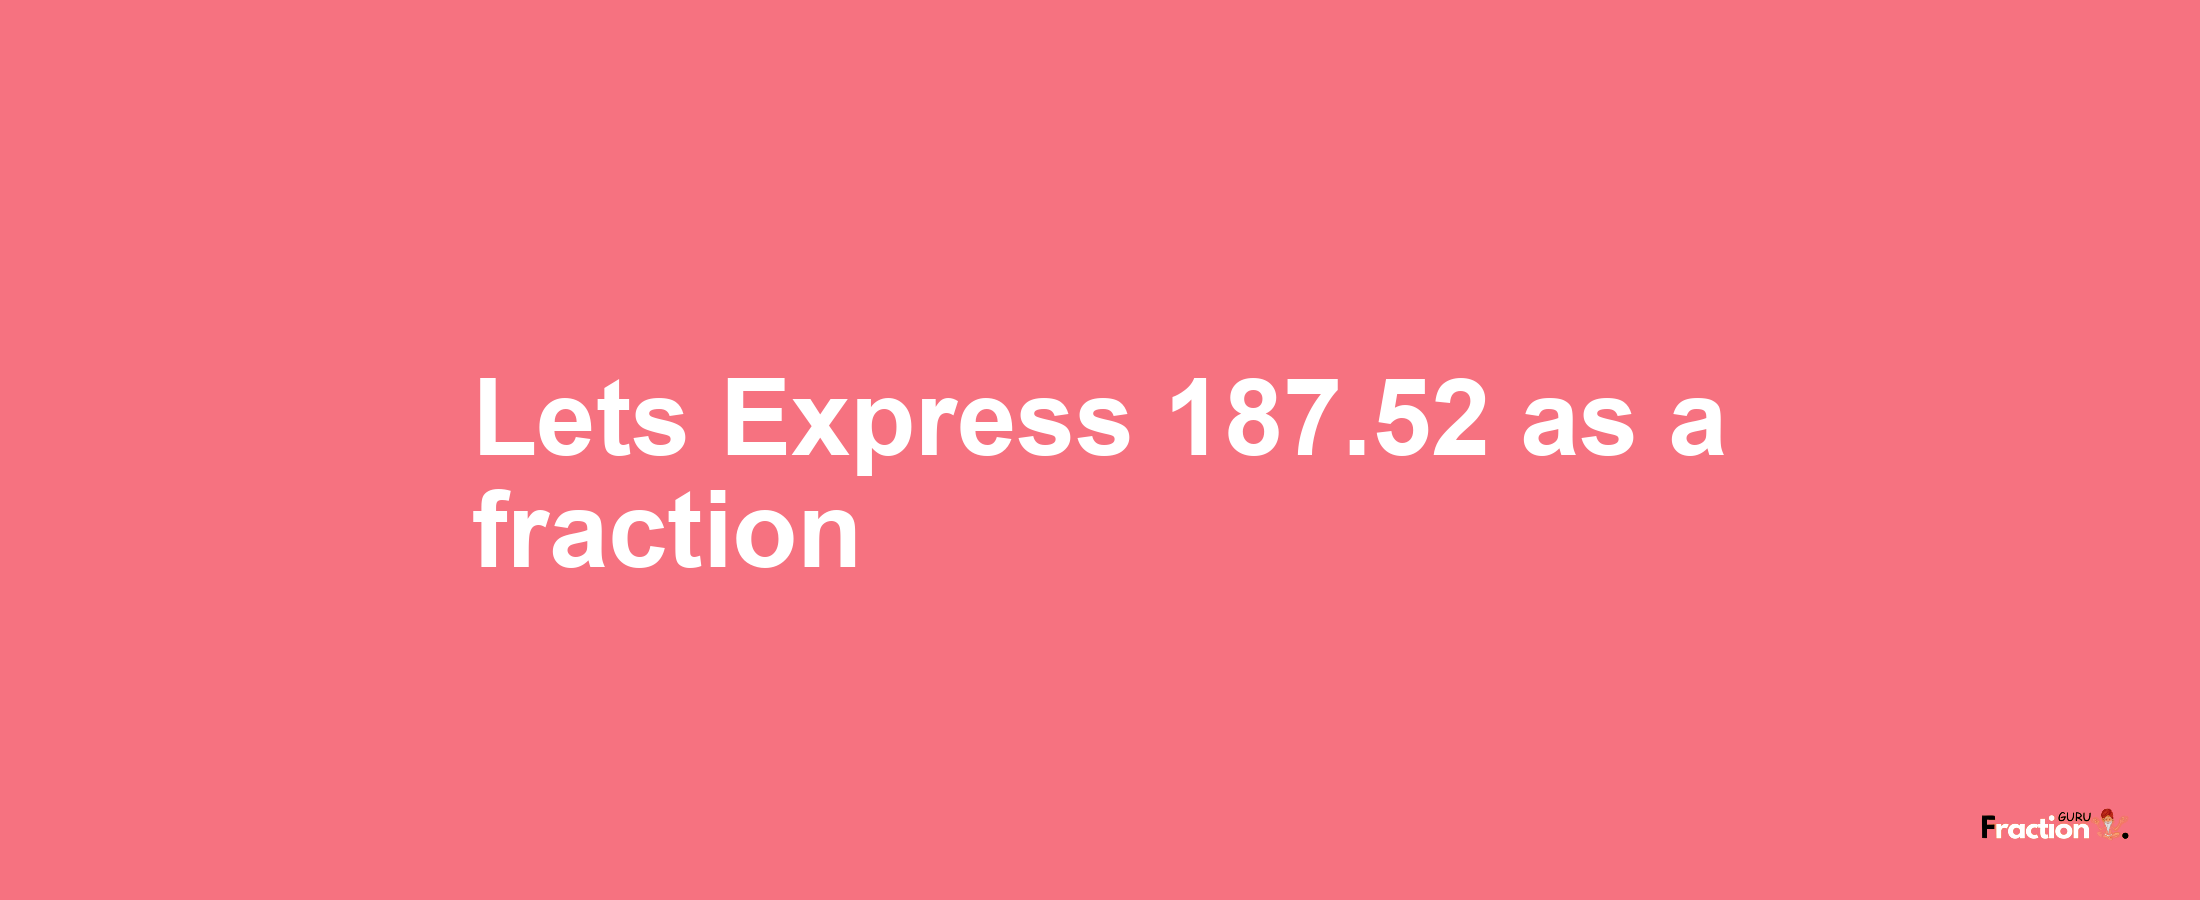 Lets Express 187.52 as afraction